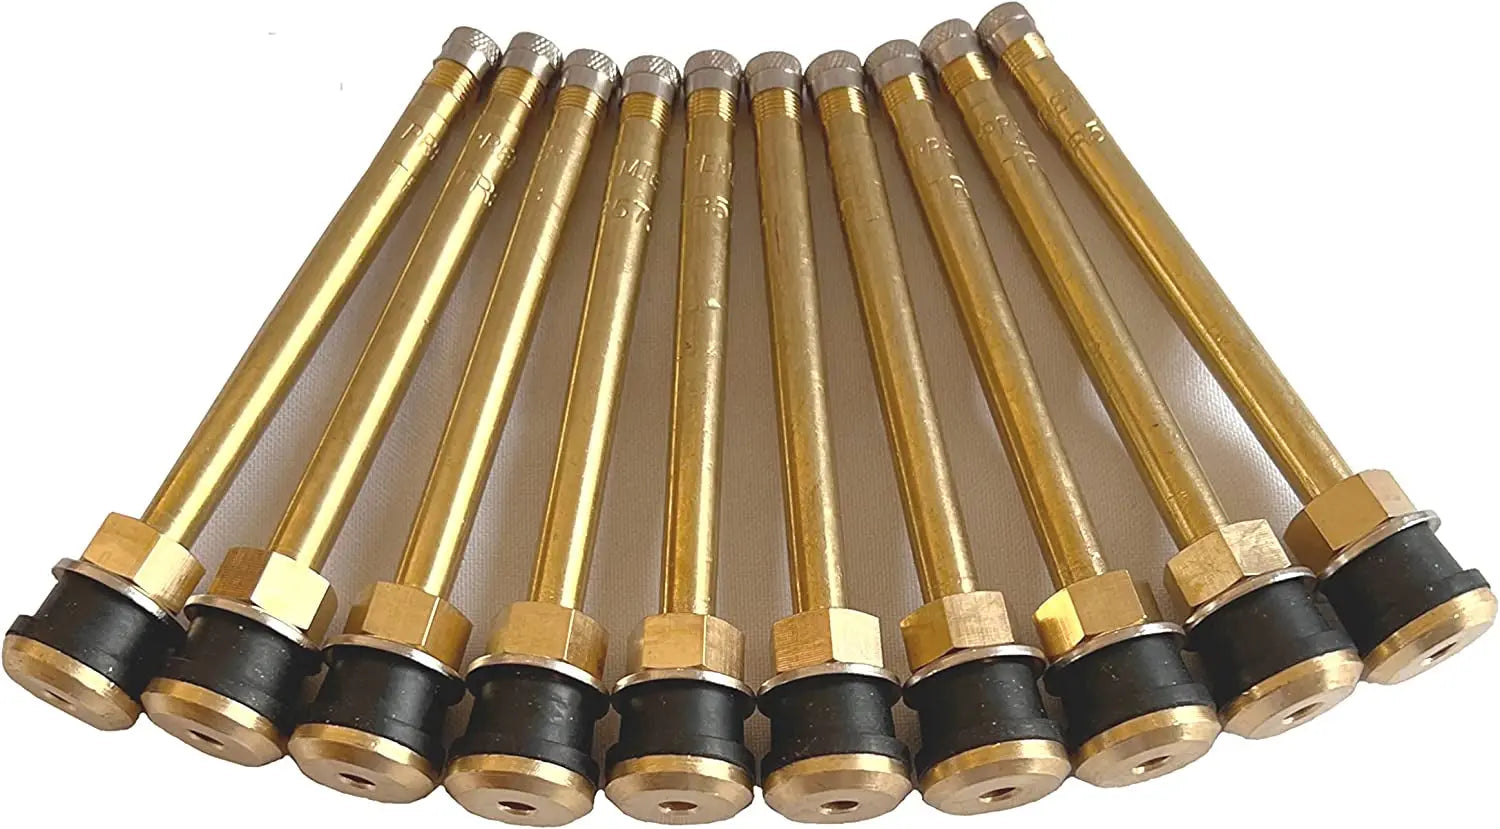 Workhorse Automotive TR573 Truck Tire Valve Stems, Replacement Truck Valve Stems, Pack of 10, save 10% Buying 2 or More!